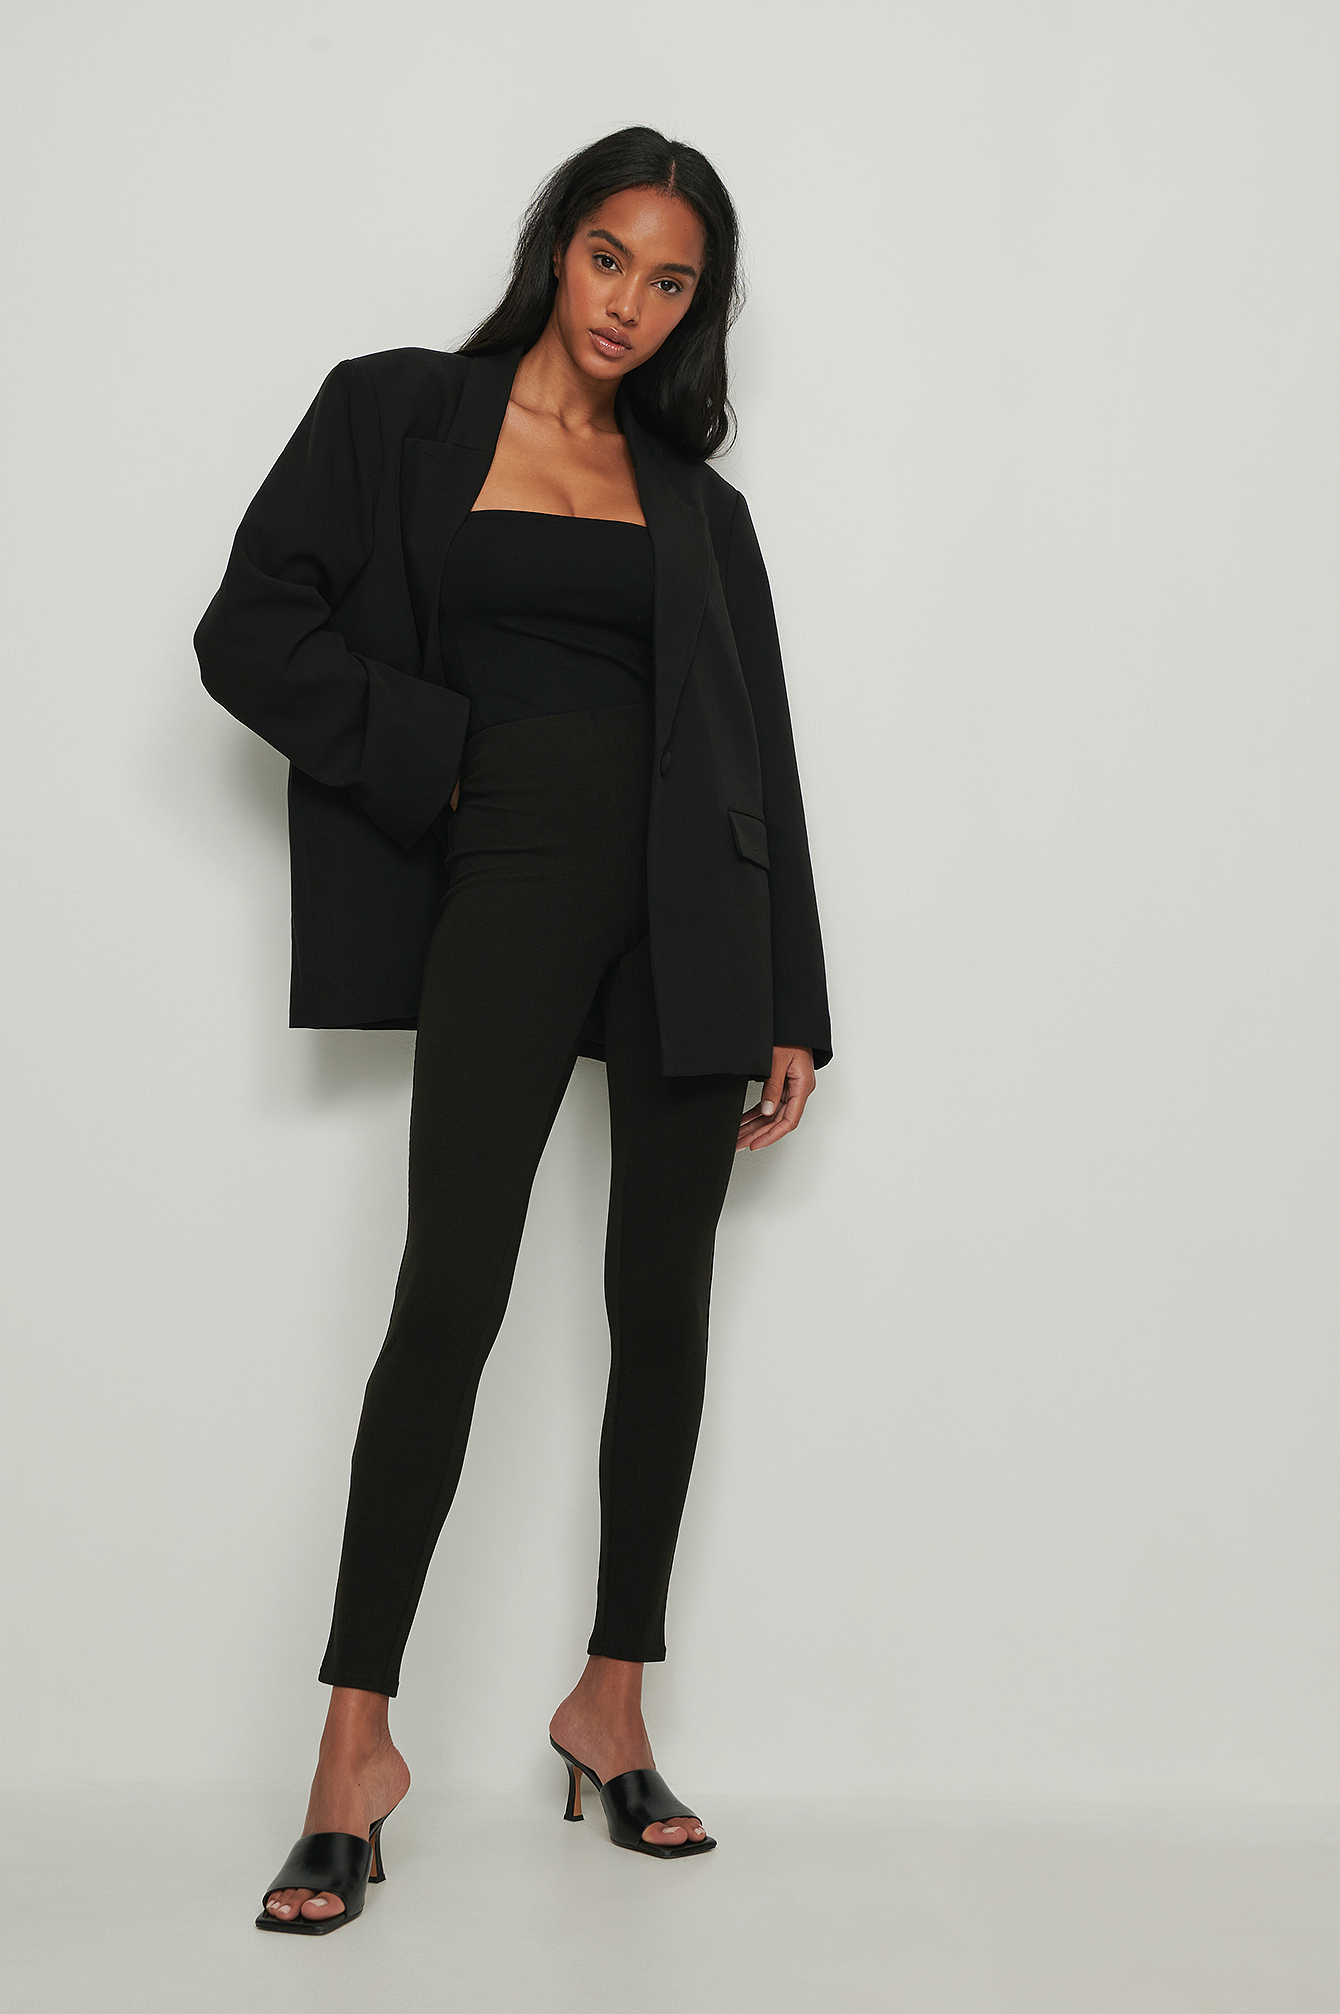 Cut Out Waist Detail Rib Pants Outfit